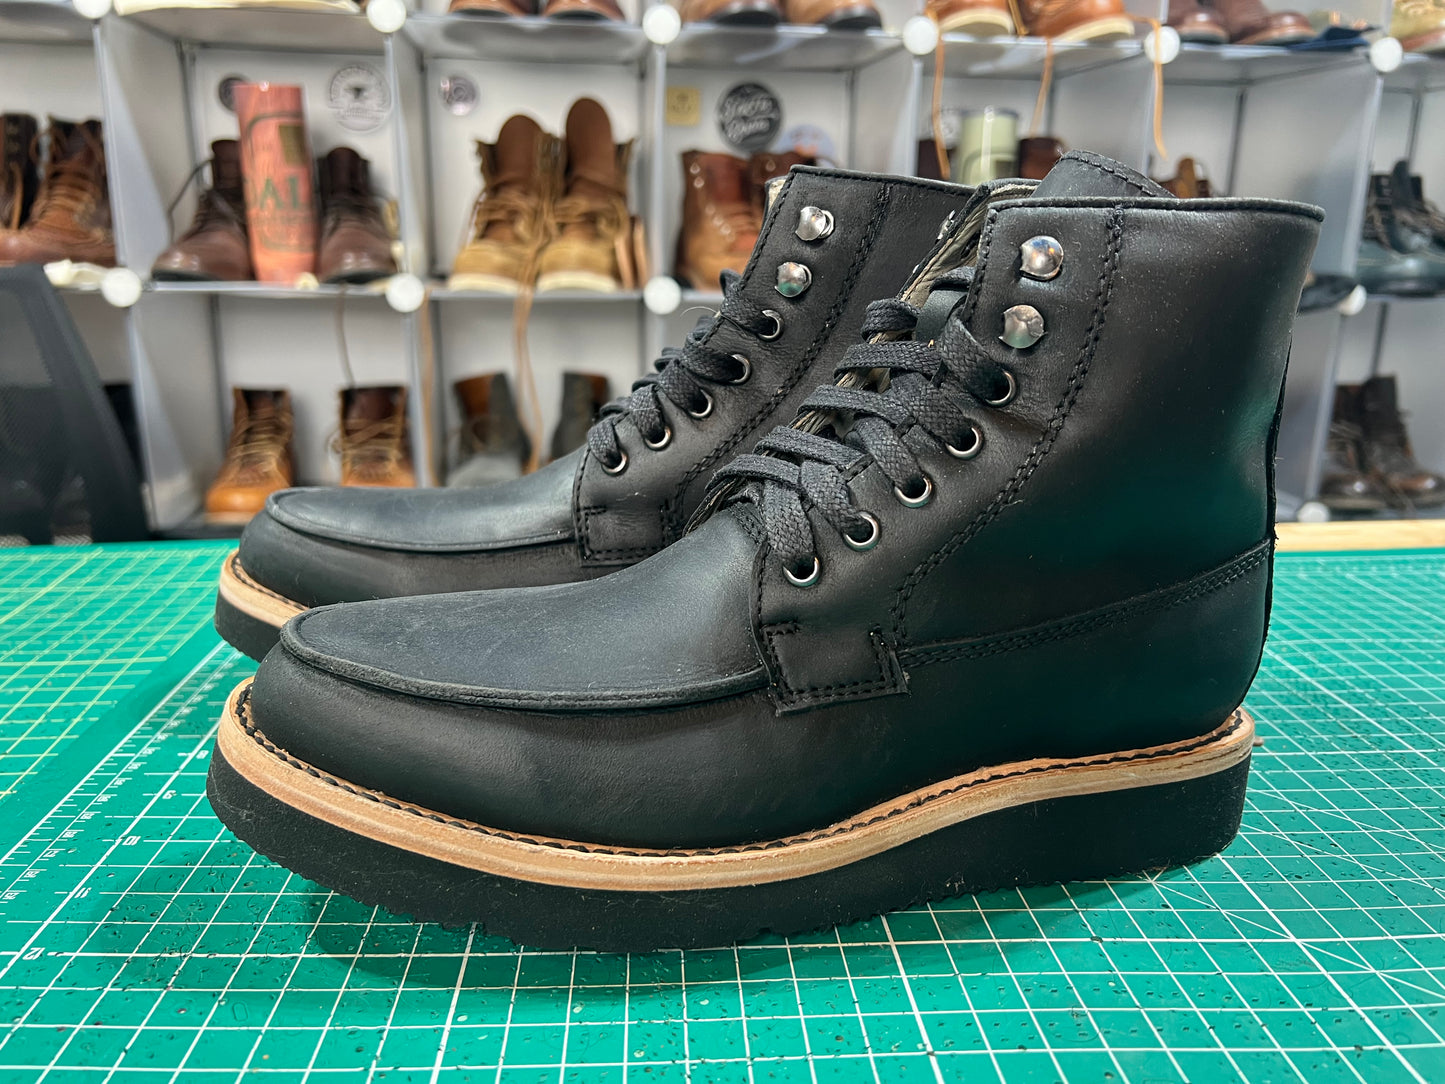 Dievier Nomad Boots in Black Crazy Horse 8.5D